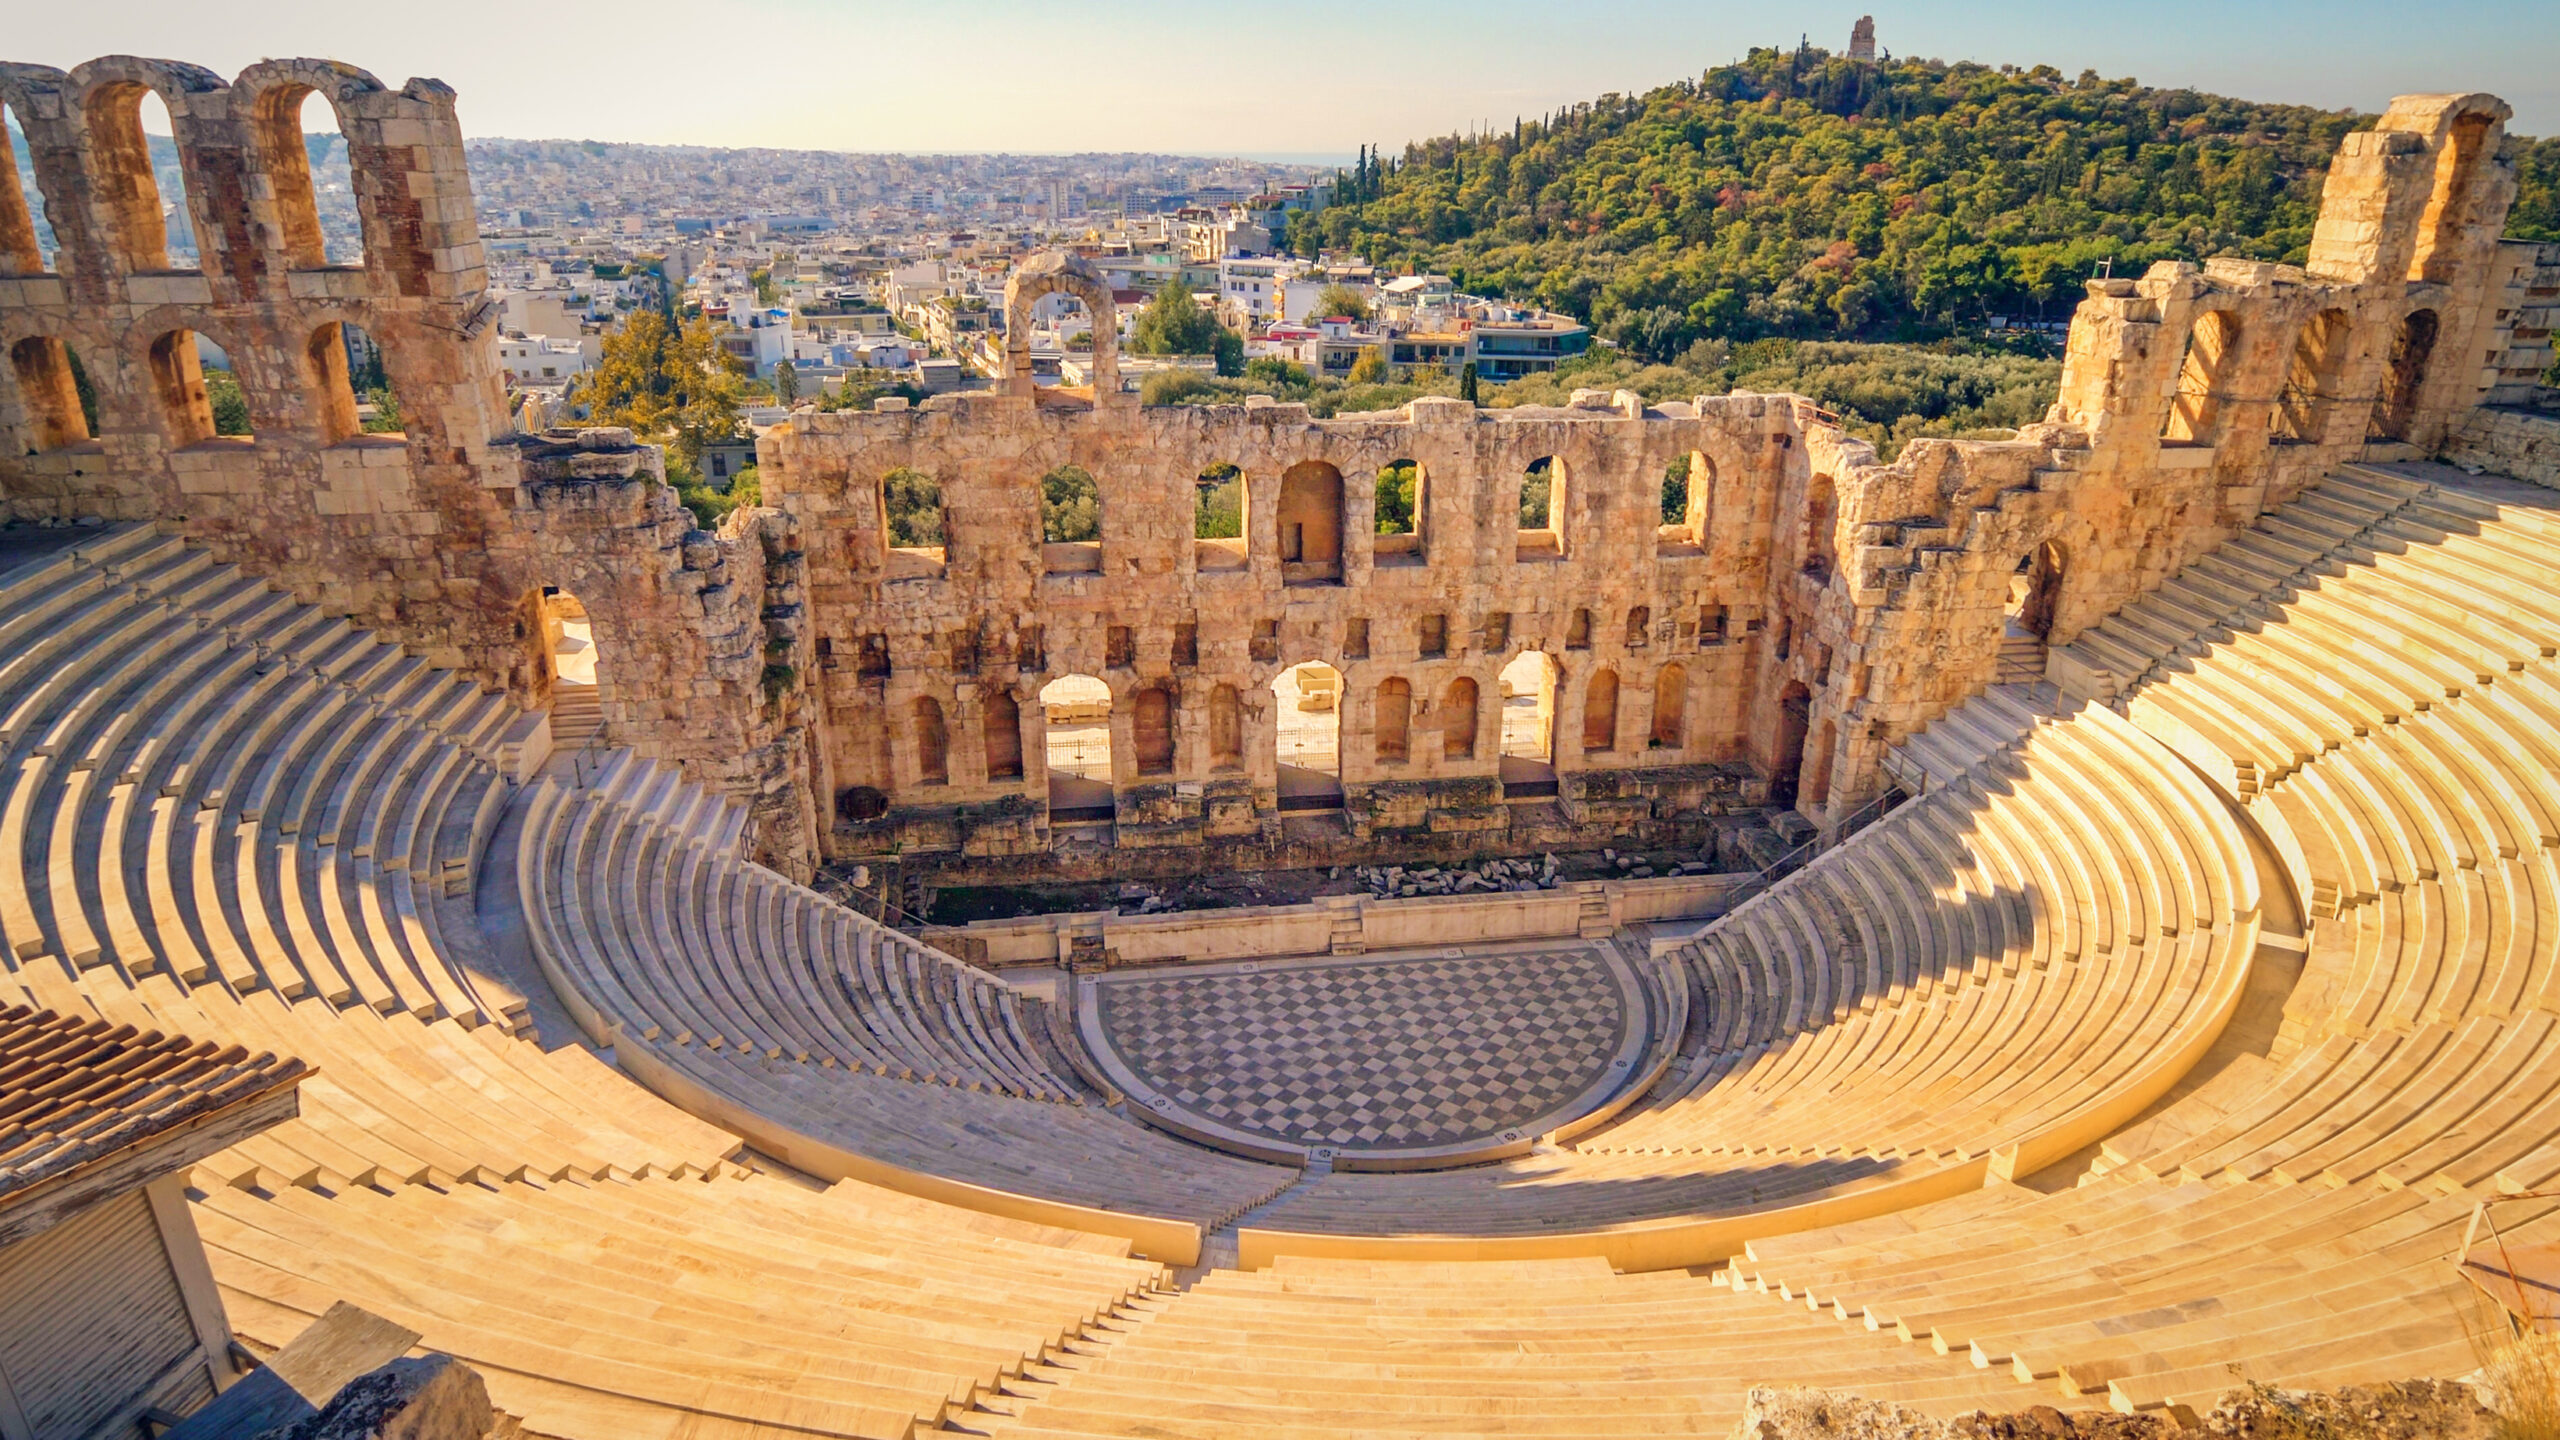 Theatre of Dionysus below the Acropolis in Athens, Greece is considered to be the worlds first theater aka Odeon of Herodes Atticus